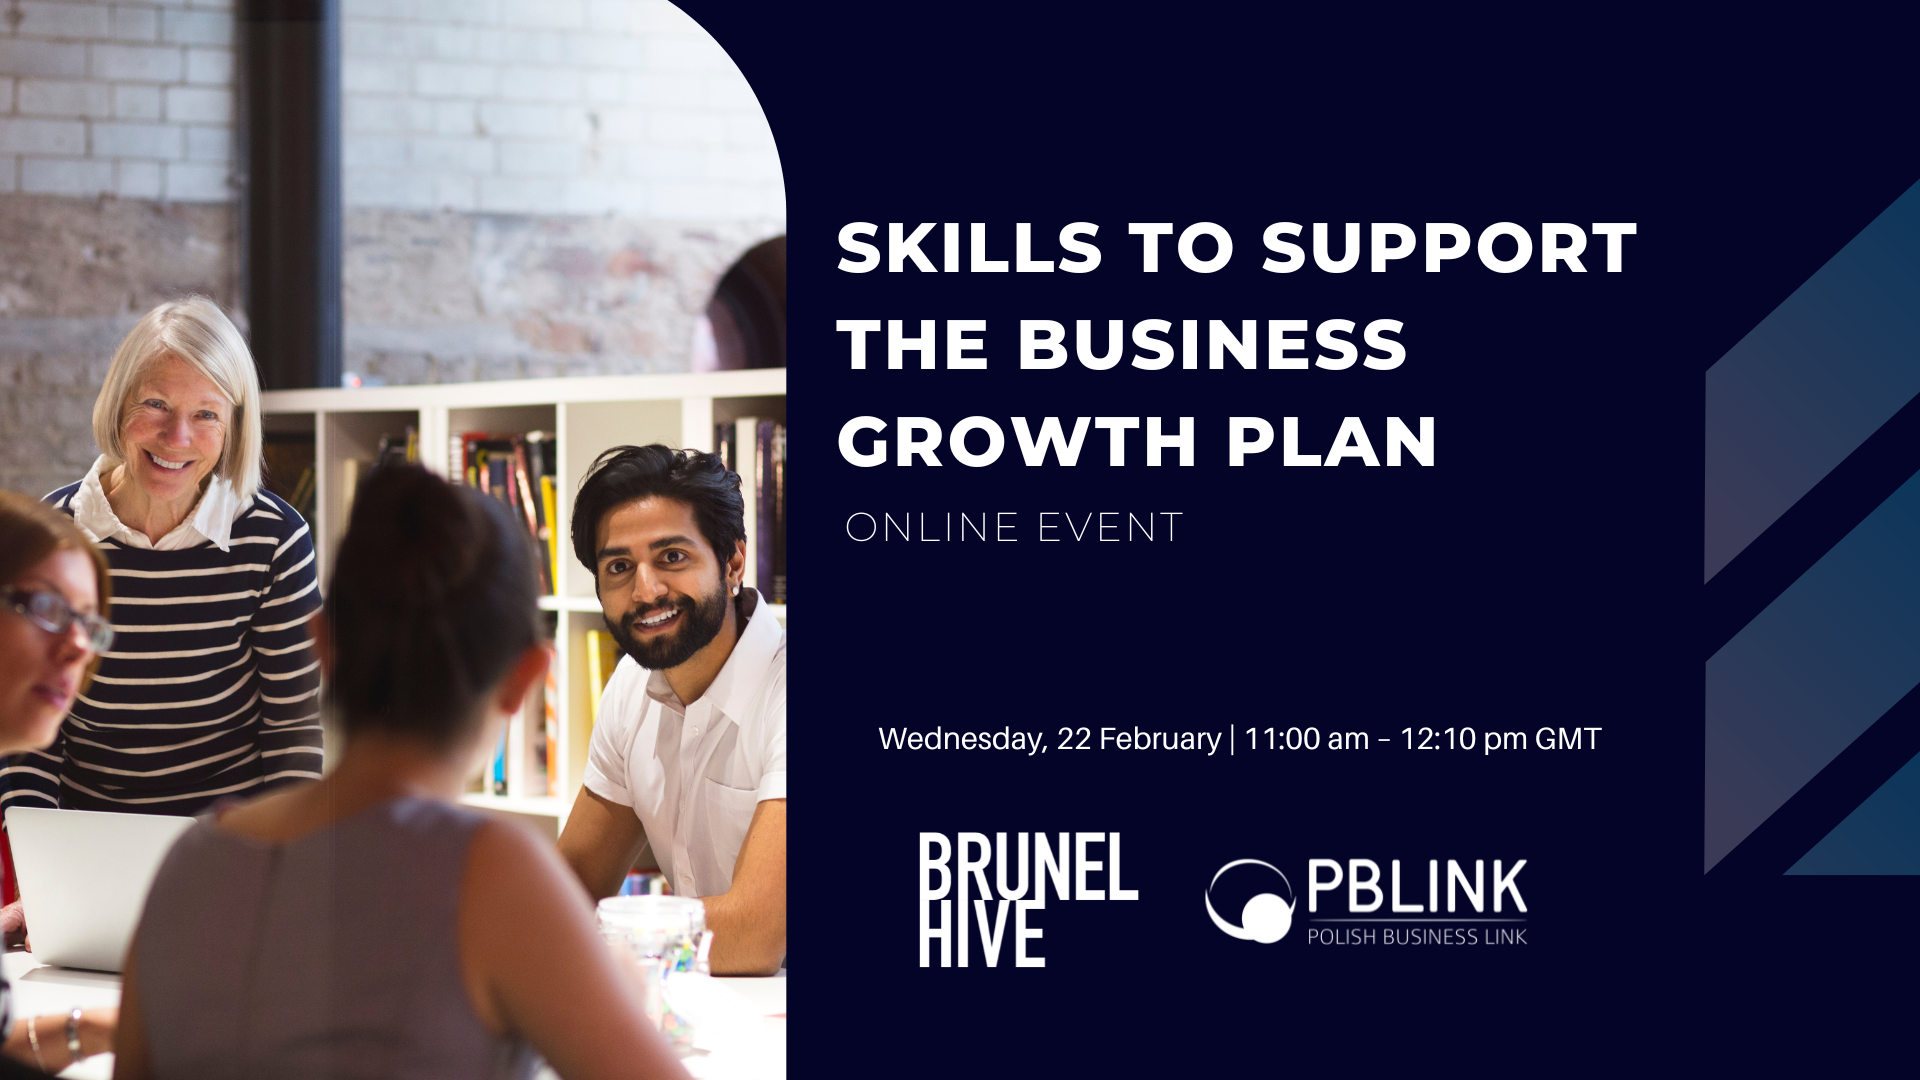 Brunel Hive and PBLINK Webinar: Skills to support Business Growth Plan